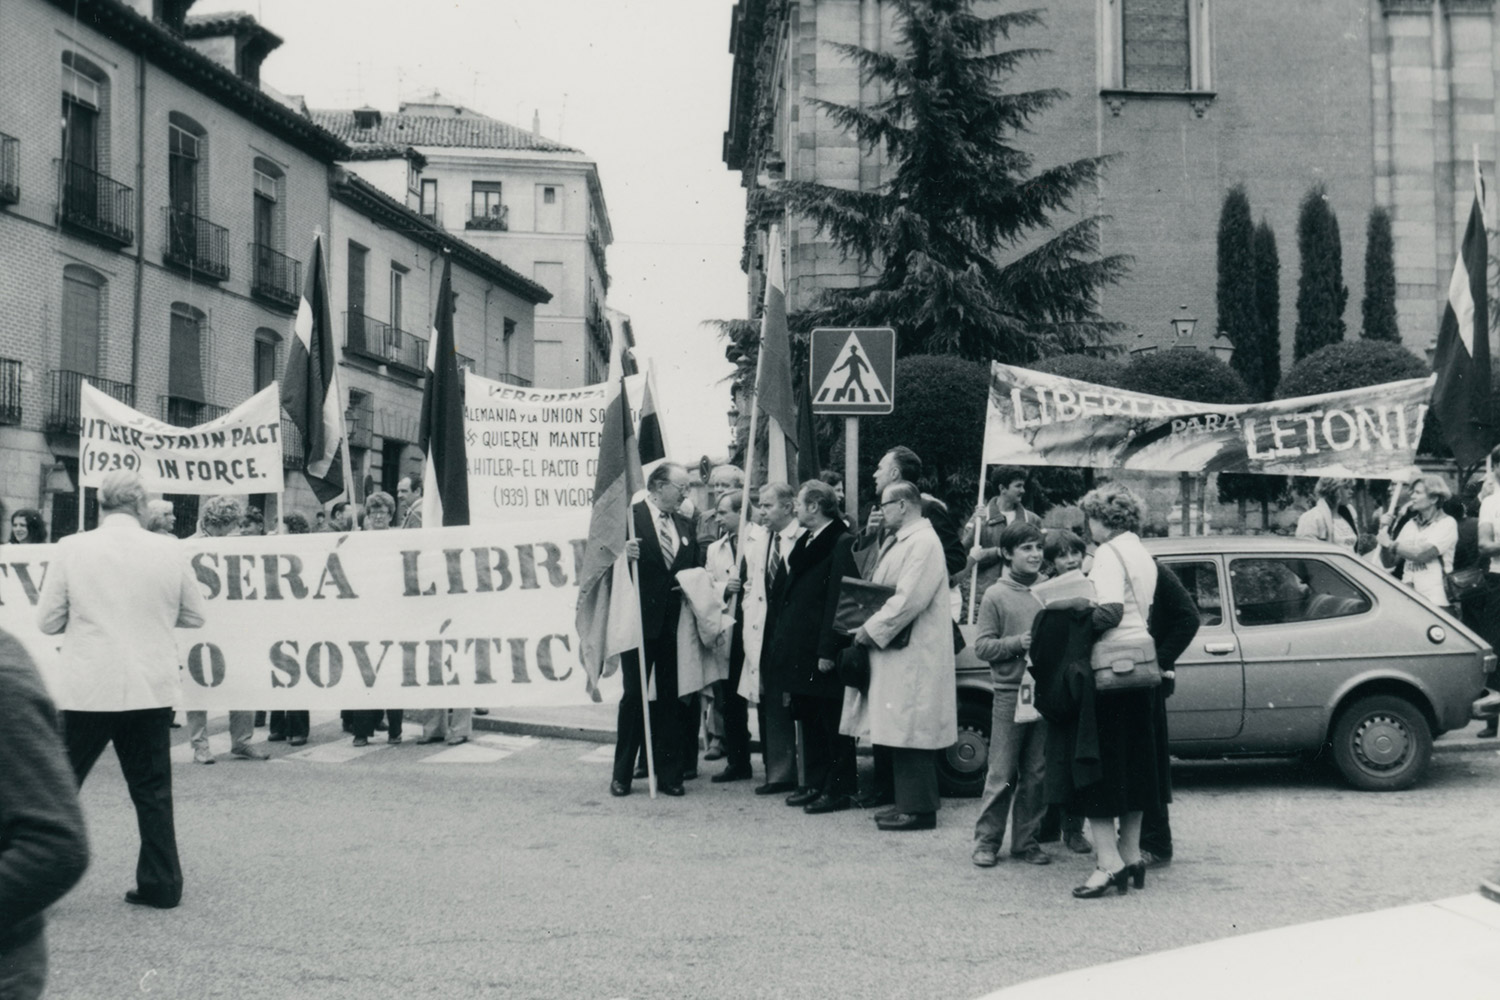 1980 – Madrid, Spain. A demonstration organised by political expatriates of the Baltic States during the Conference on Security and Cooperation in Europe in Madrid. In the middle: Mykolas Vaidyla (member of the American Lithuanian Council and editor of Santara), Vladas Šakalys (member of the resistance, who fled from the USSR), Dr Kazys Bobelis (Chairman of the Board of the Supreme Committee for the Liberation of Lithuania, hereinafter – VLIK), Dr Jonas Genys (correspondent of the National Republican Heritage Groups (Nationalities) Council, representative of the American Lithuanian Council, hereinafter – ALT), Dr Kostas Jurgėla (Director of the Lithuanian division of Voice of America), Aleksandras Mičiūdas (representative of VLIK in Argentina). LVCA.